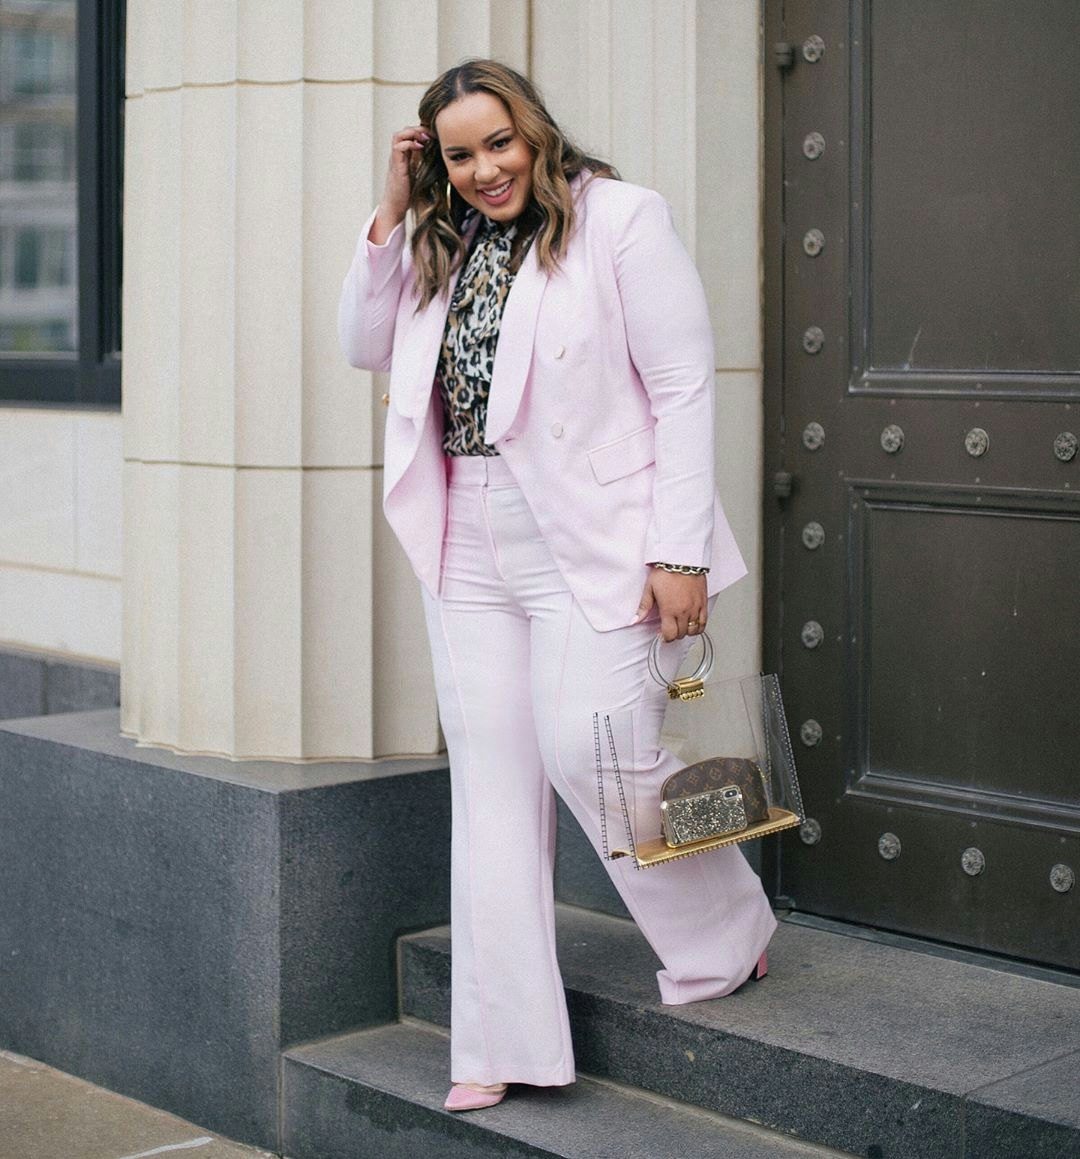 plus size tailored suits